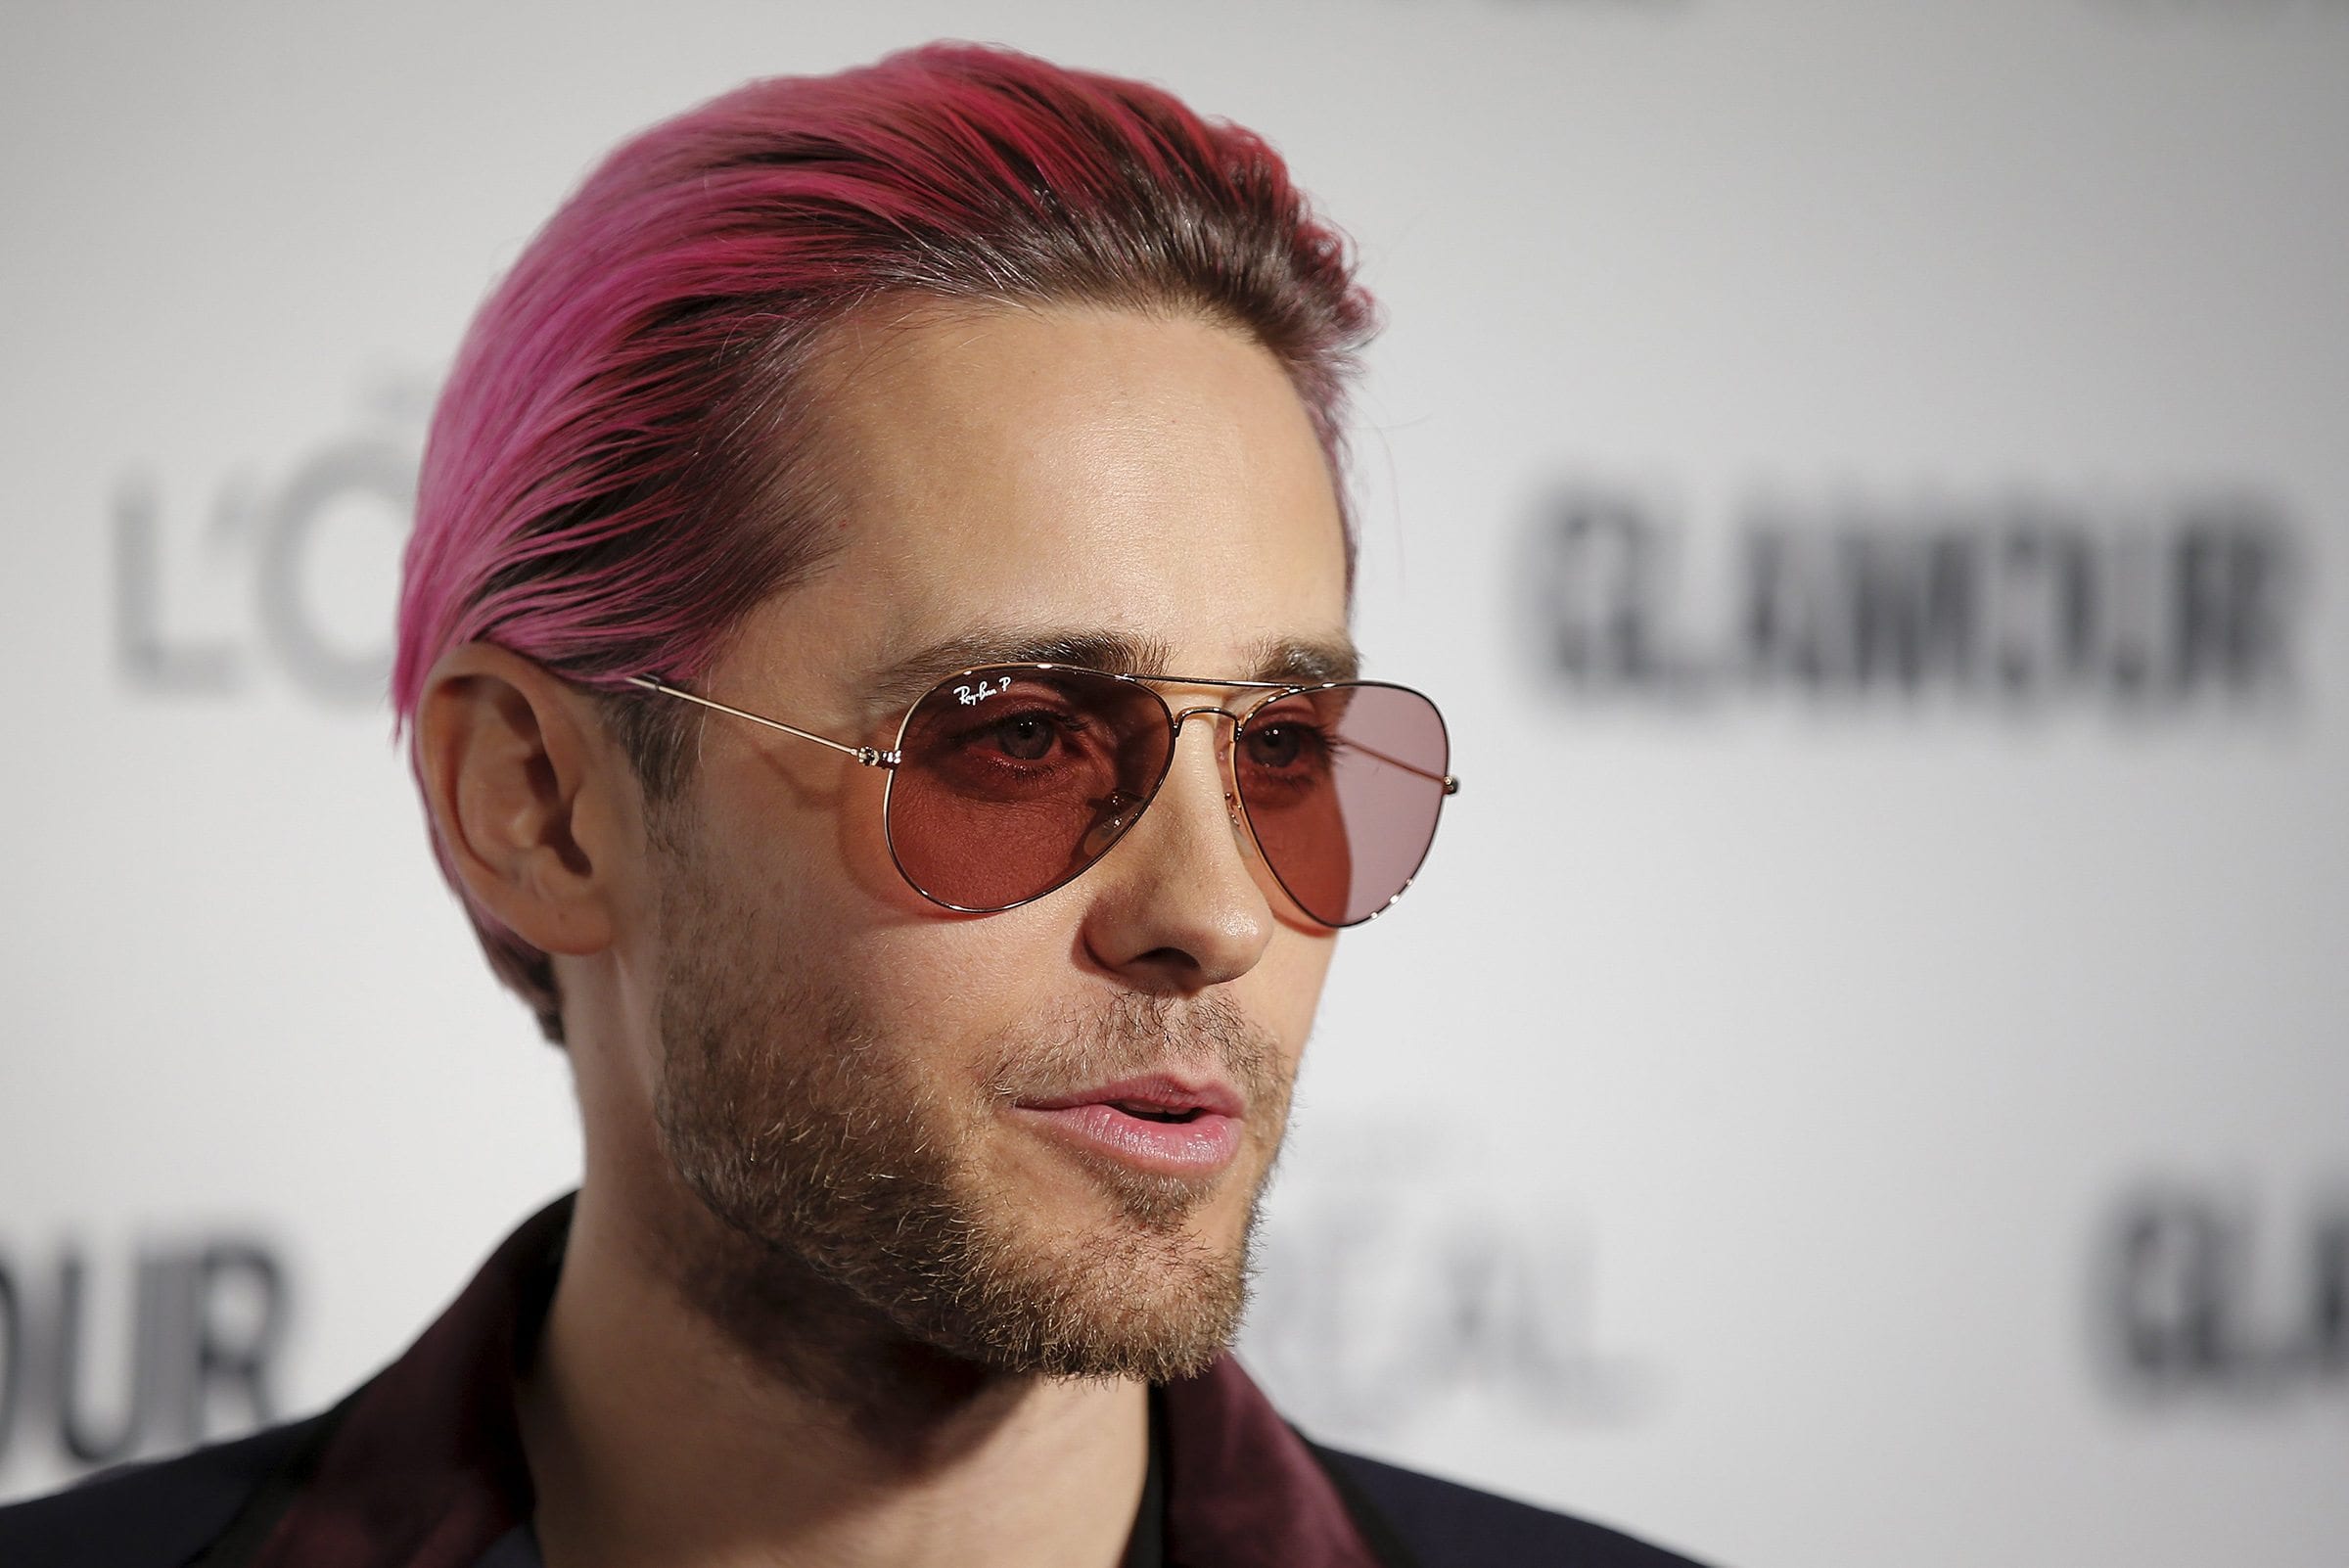 Academy Award-winner Jared Leto has been named the new Chief Creative Officer of streaming platform Fandor, after they bought his company VyRT.